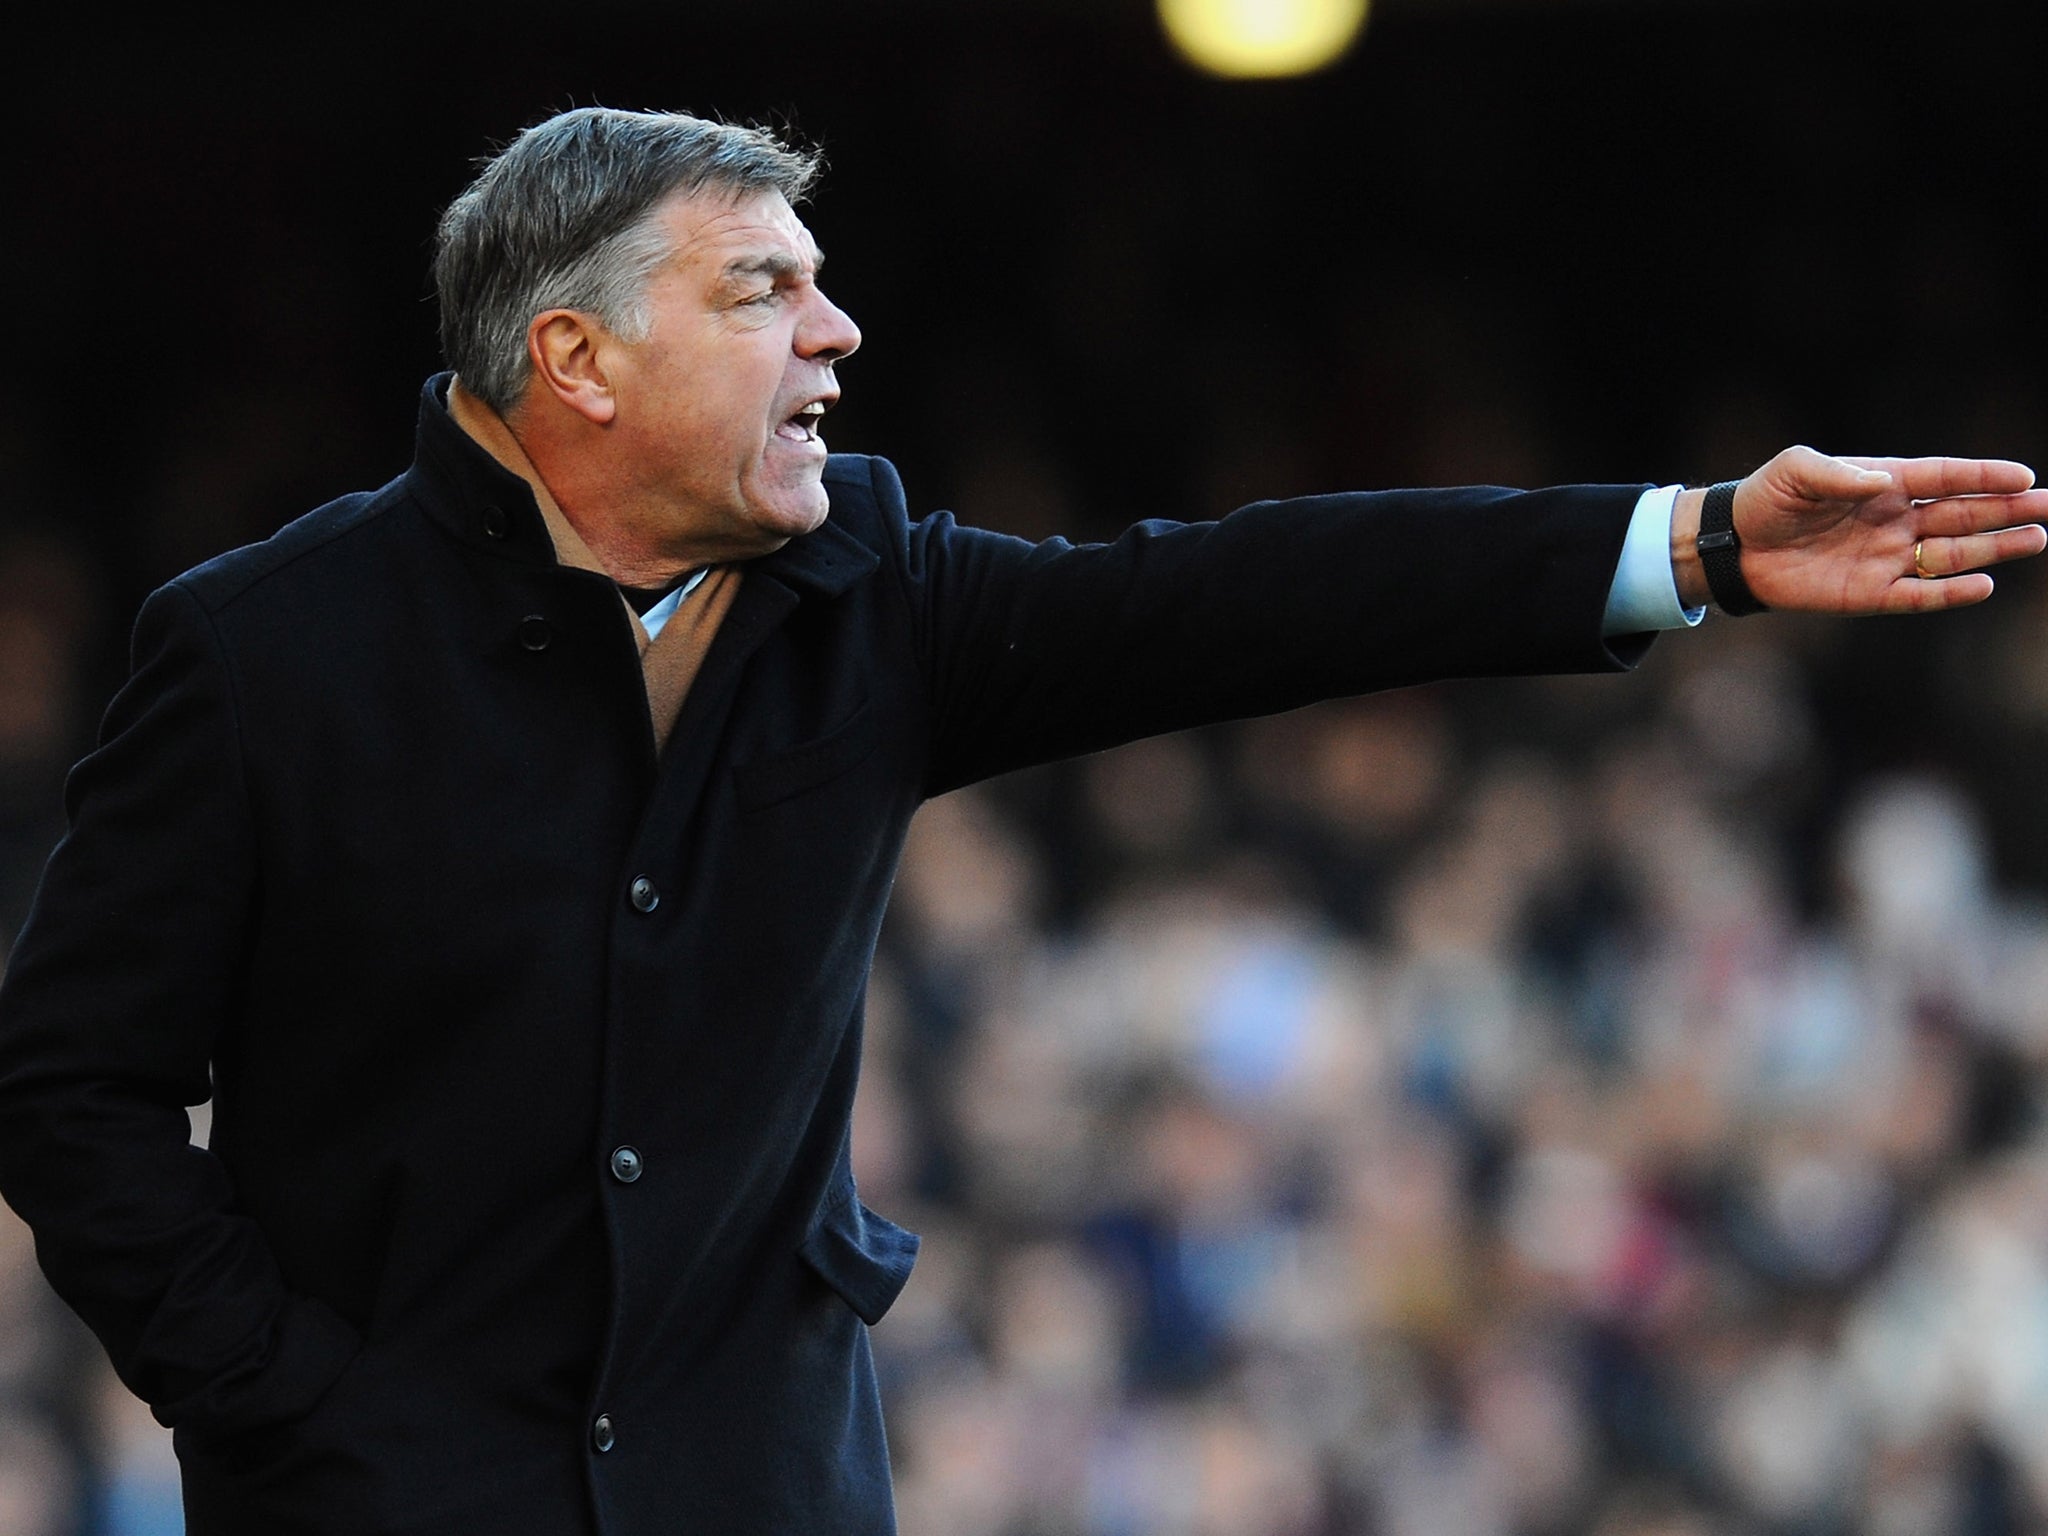 Sam Allardyce gestures from the sidelines during West Ham's 2-0 win over Swansea